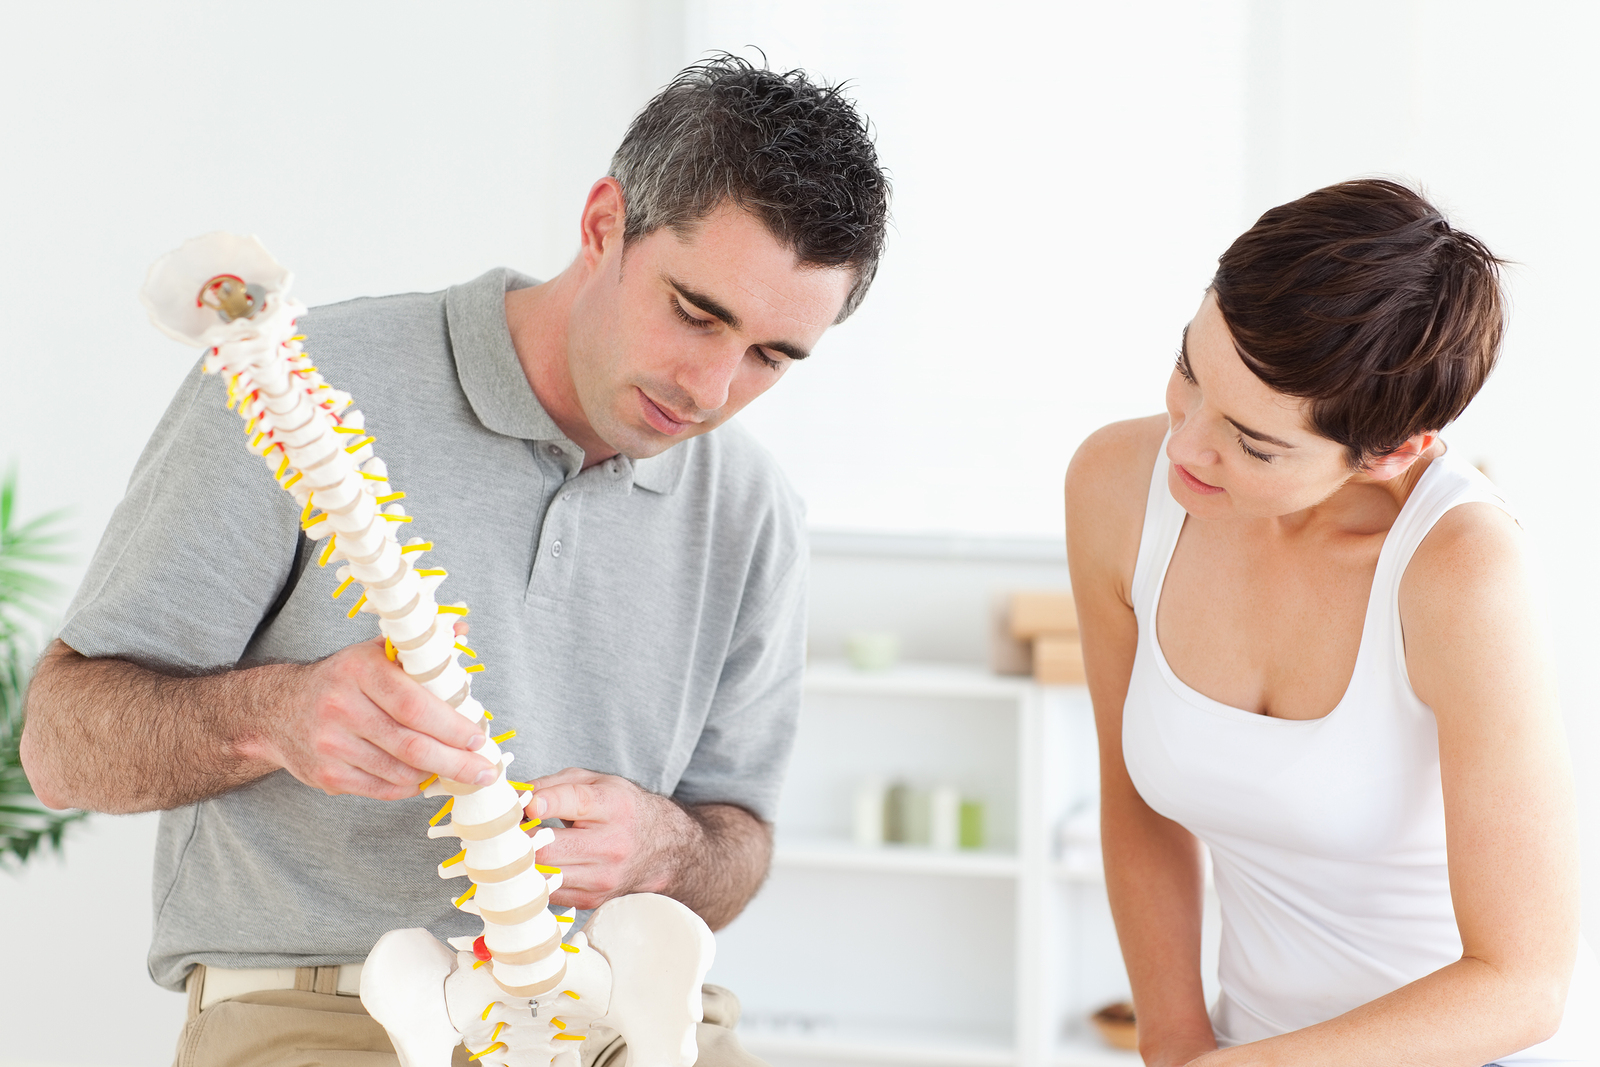 Bowman Chiropractic Center Treats Many Conditions